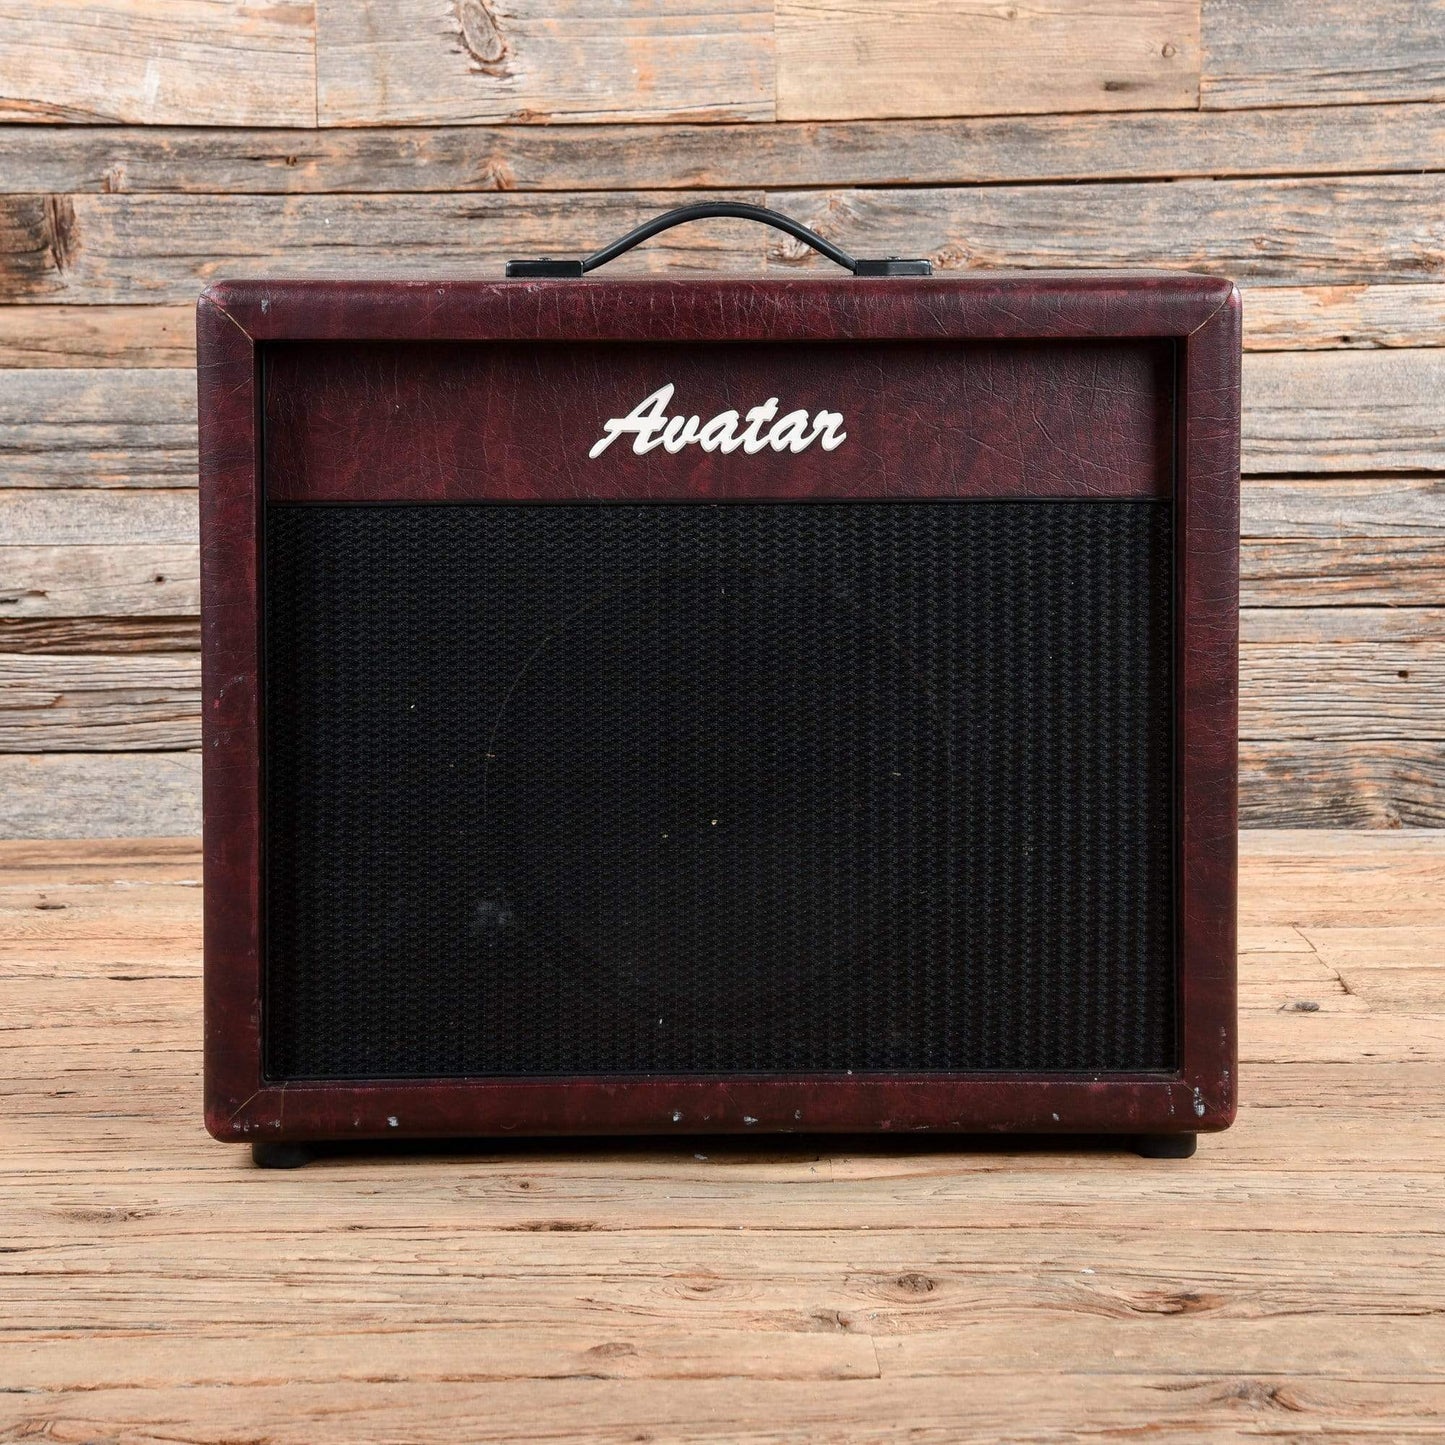 Avatar 1x12 Cabinet Amps / Guitar Cabinets